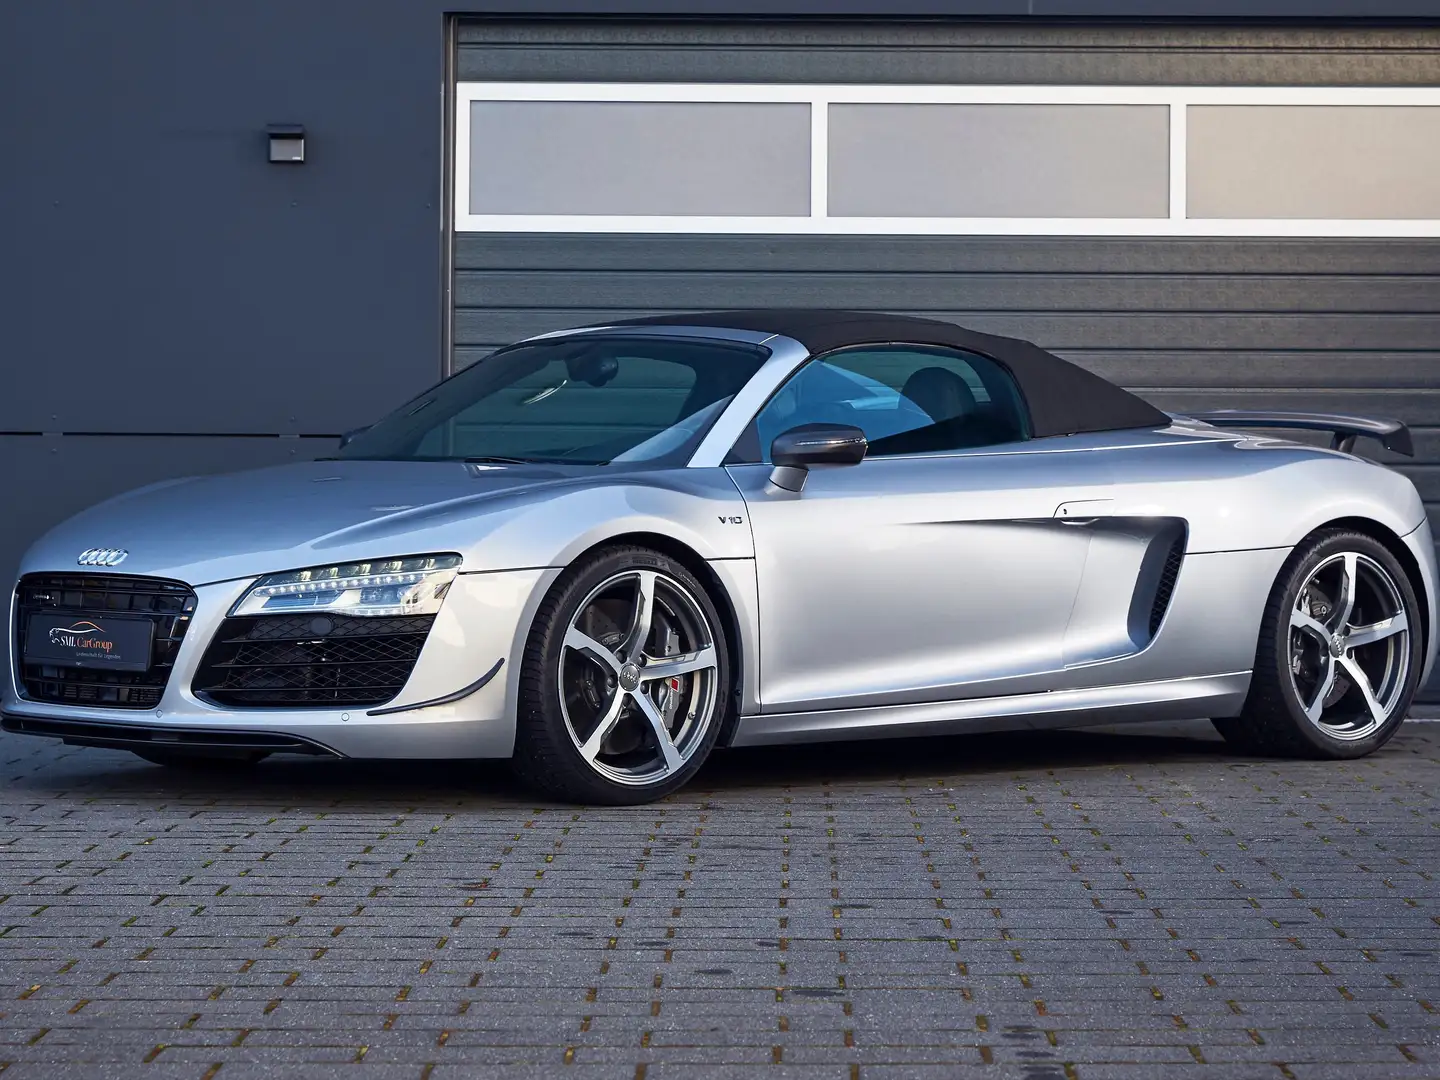 Audi R8 5.2 Spyder - Limited LeMans Edition - No. 01 of 30 Silver - 1